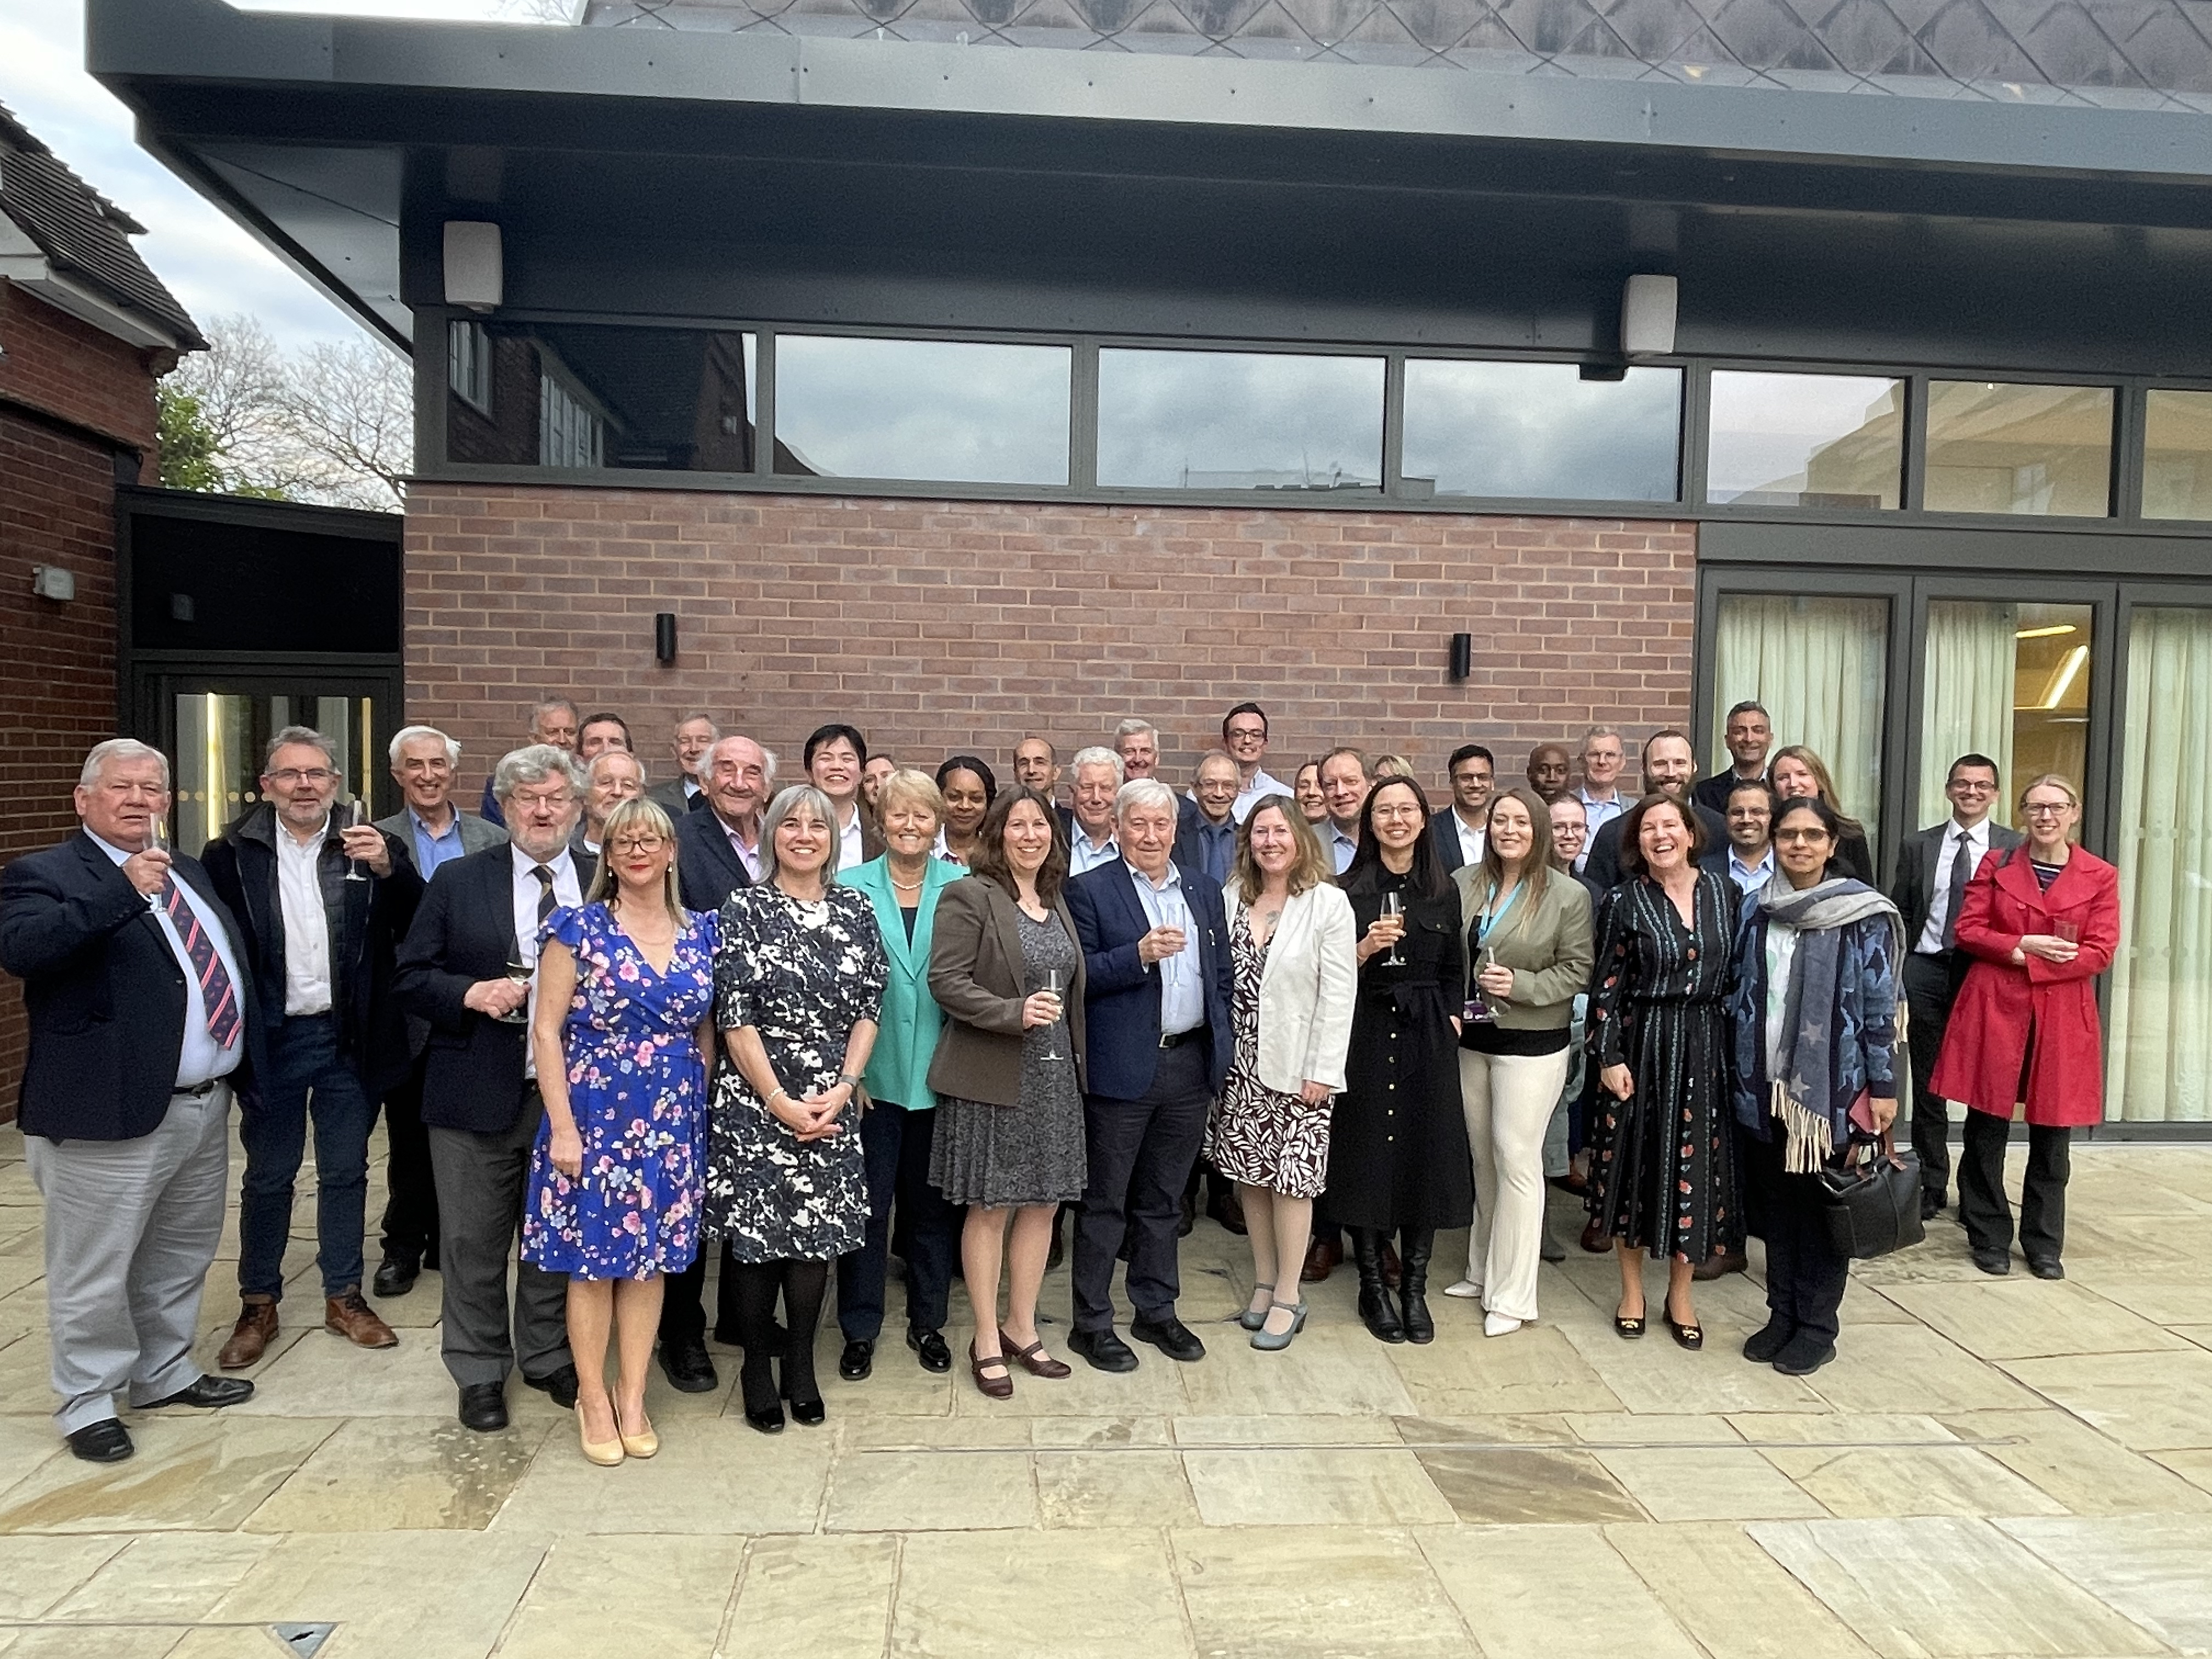 Group photo of researchers attending the 50 years of respiratory research event.